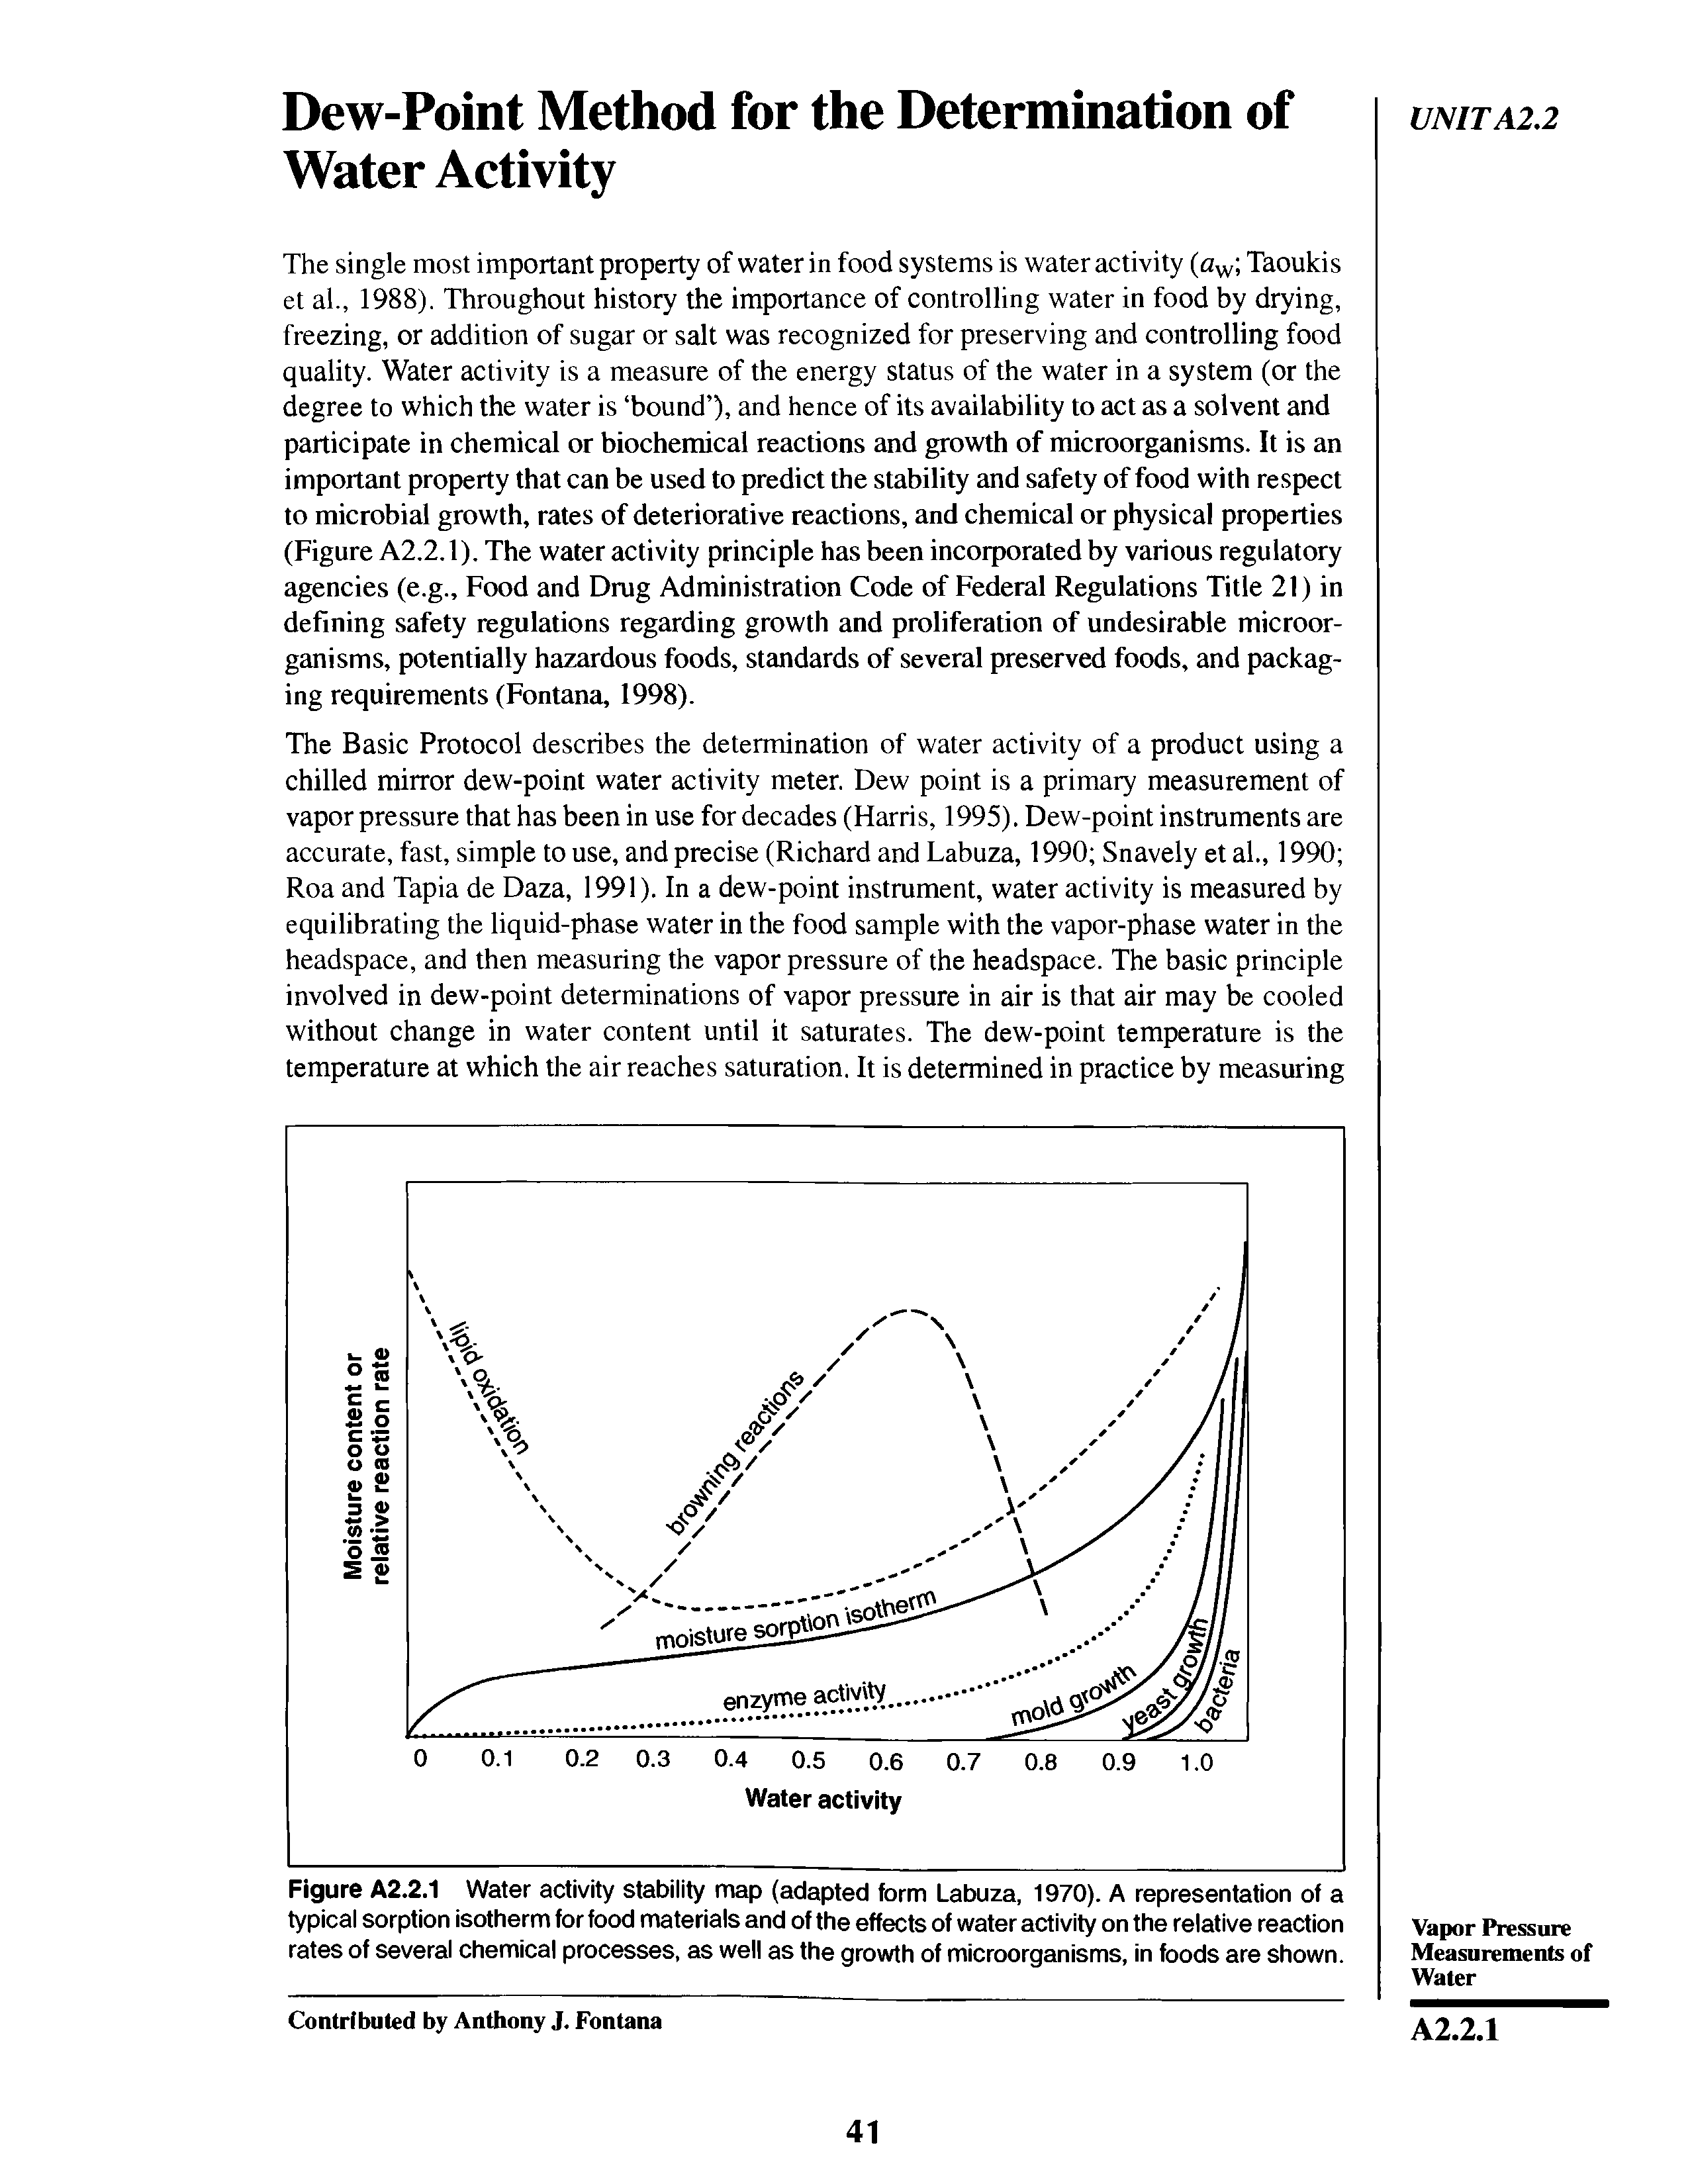 Figure A2.2.1 Water activity stability map (adapted form Labuza, 1970). A representation of a typical sorption isotherm for food materials and of the effects of water activity on the relative reaction rates of several chemical processes, as well as the growth of microorganisms, in foods are shown.